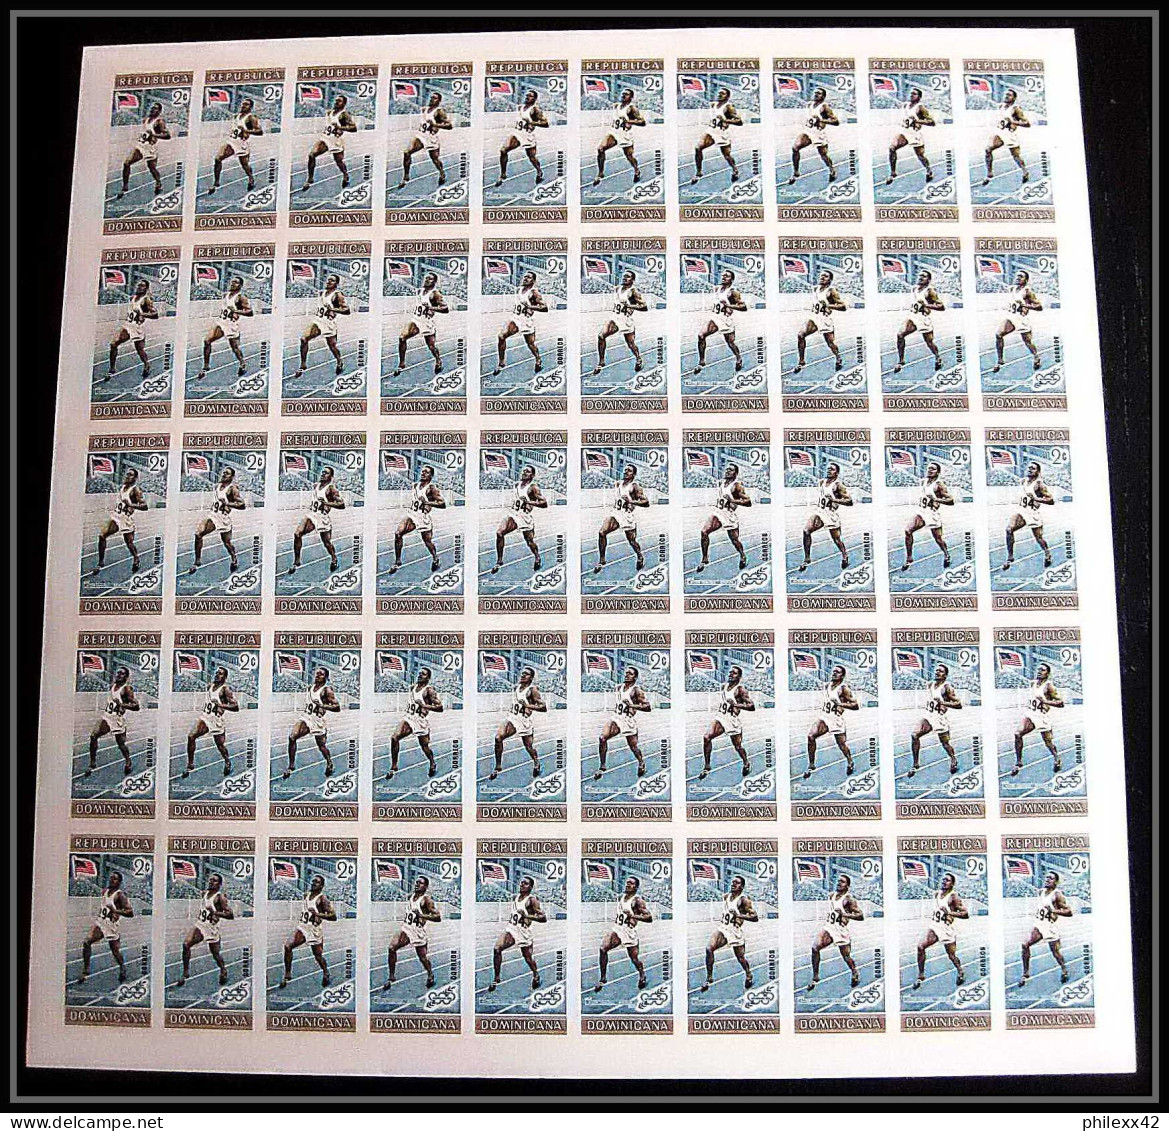 209b dominicana MNH ** N° 660 / 667 B non dentelé (Imperf) jeux olympiques (olympic games MELBOURNE feuilles sheets